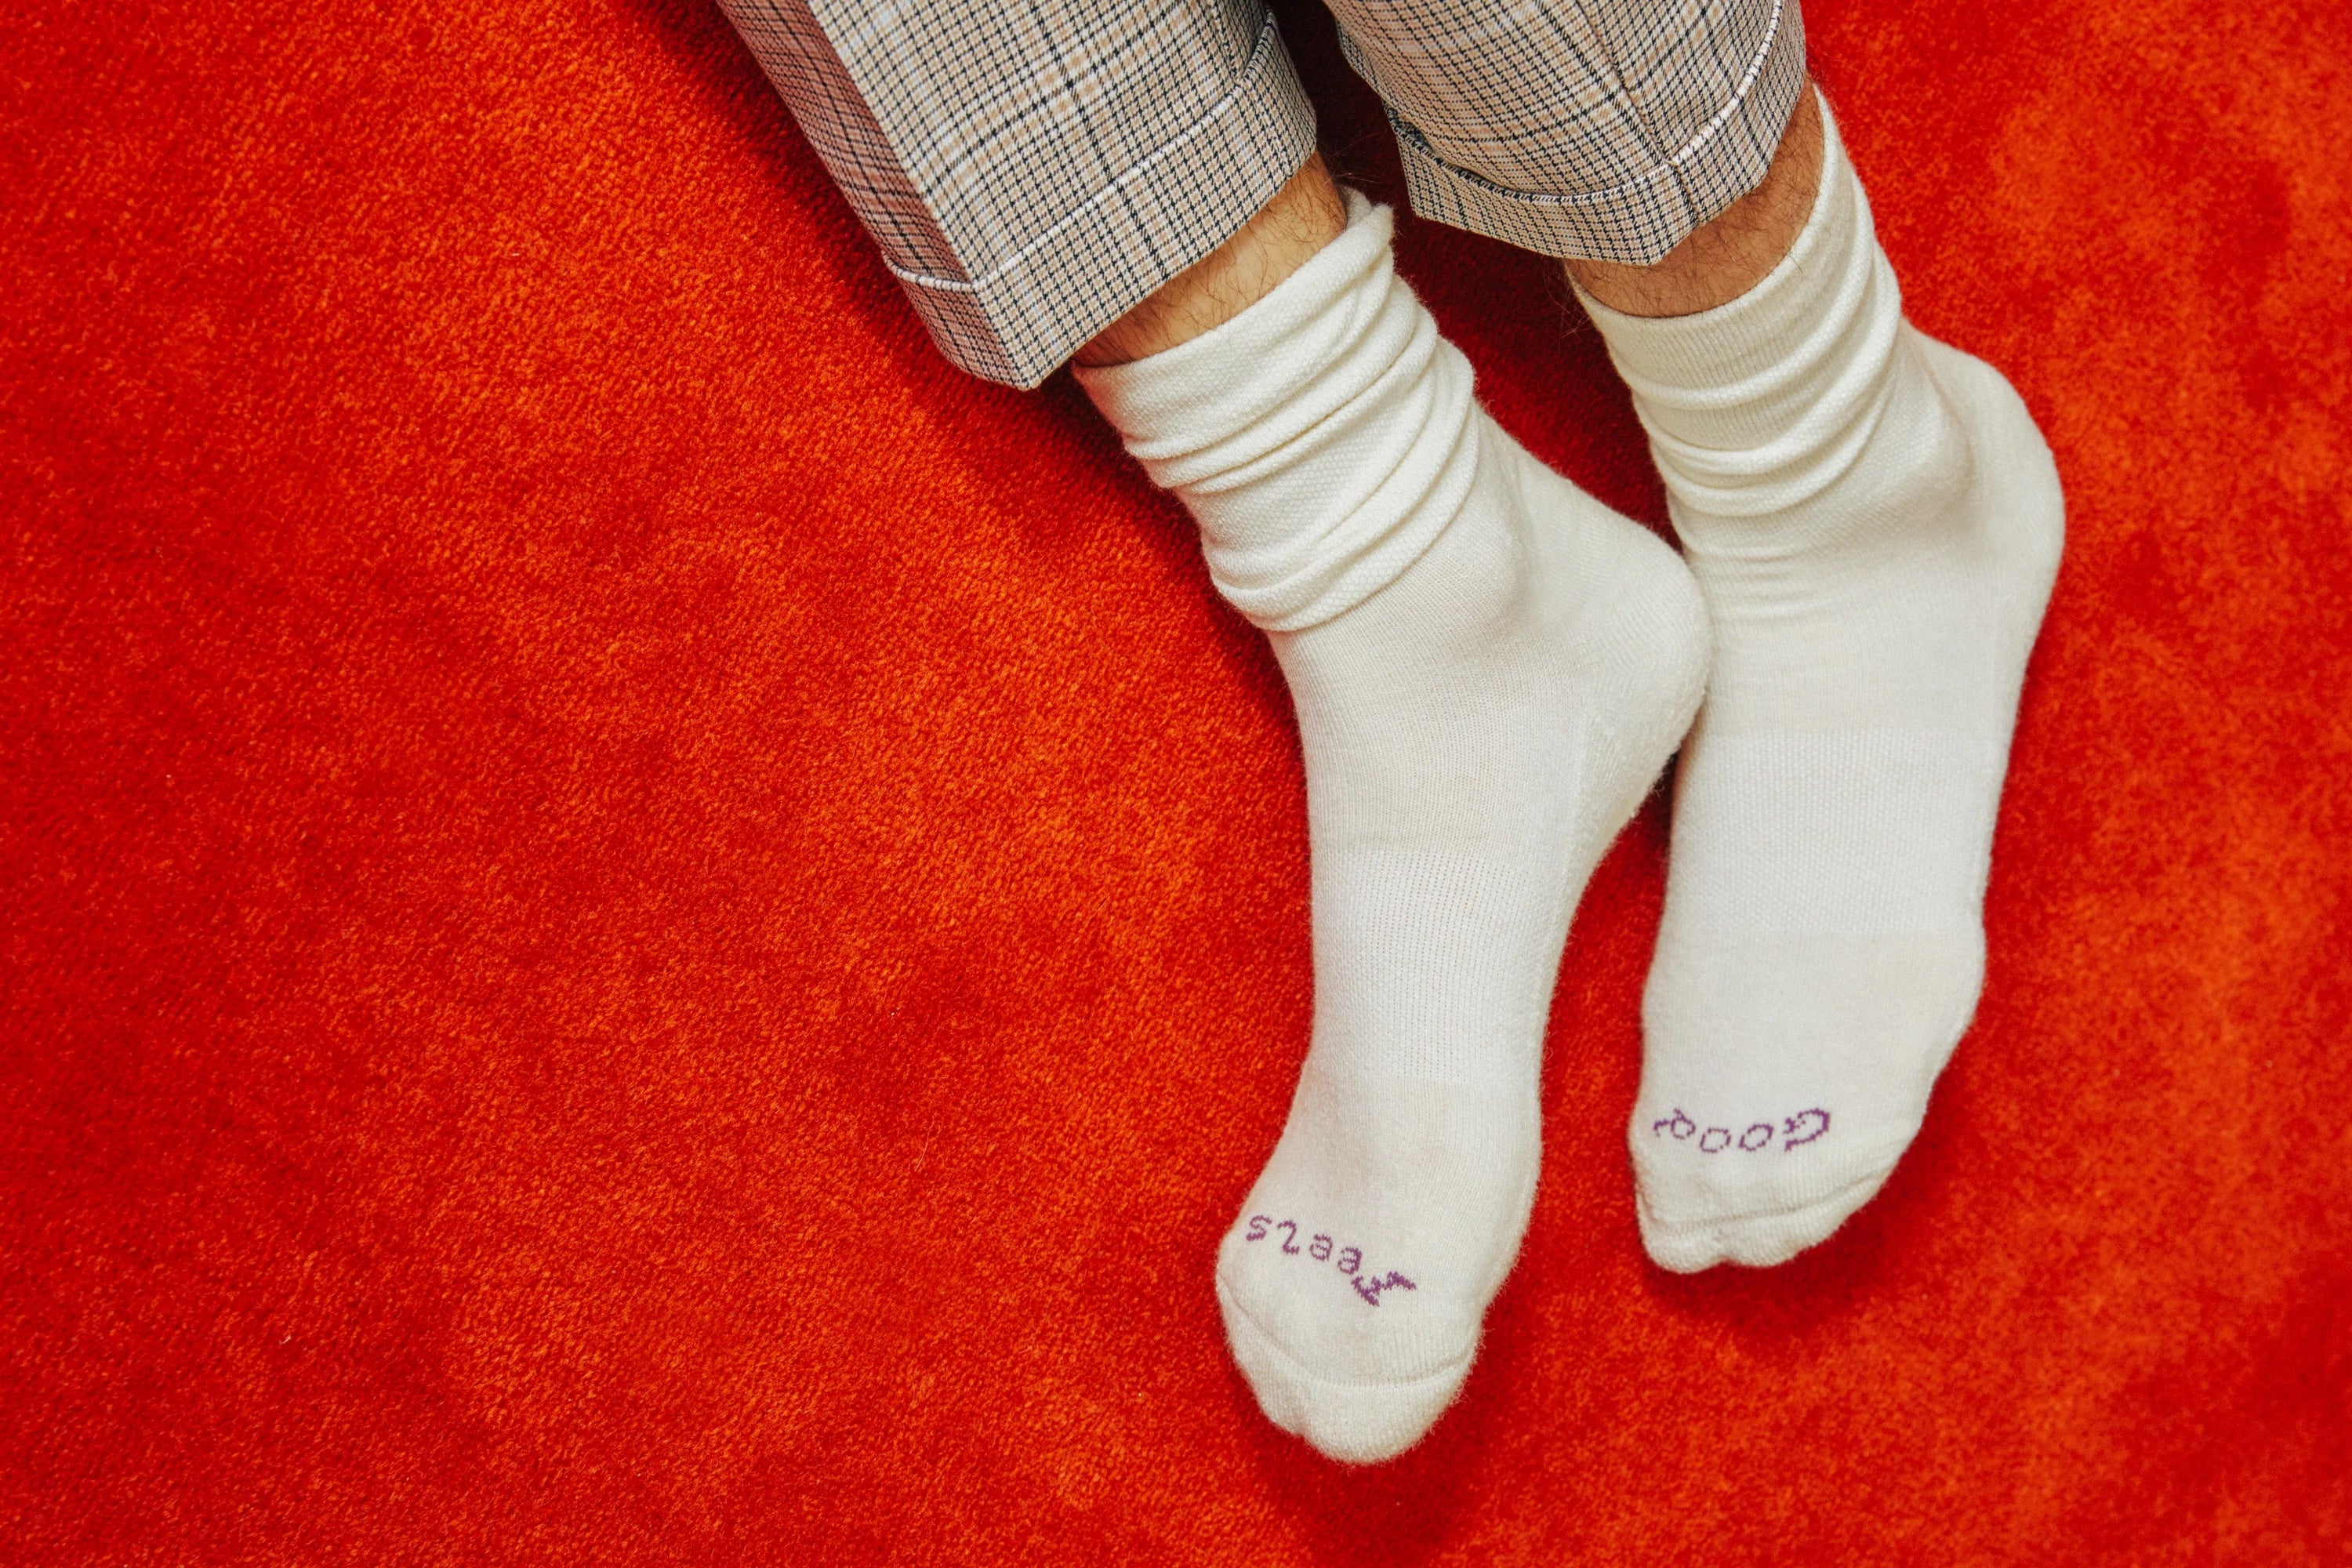 New Study Finds You Should Definitely Be Wearing Socks During Sex